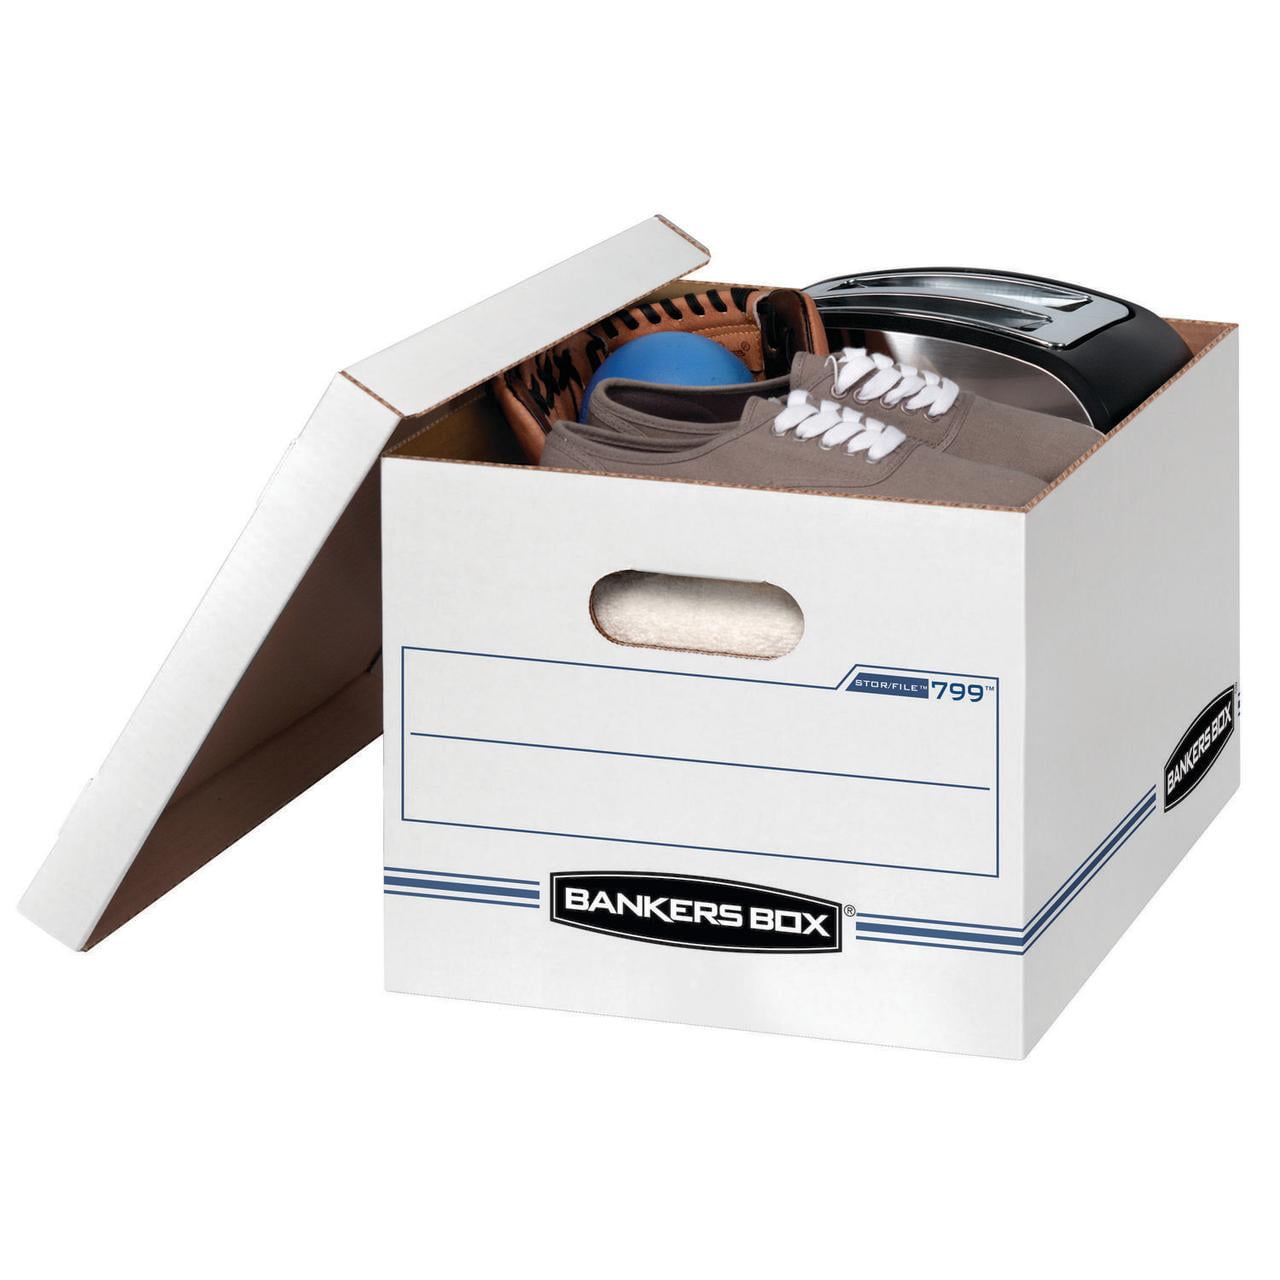 *10 Pack* Bankers Box Stor//File Storage Box w//Lift-Off Lid,Letter//Legal,12x10x15